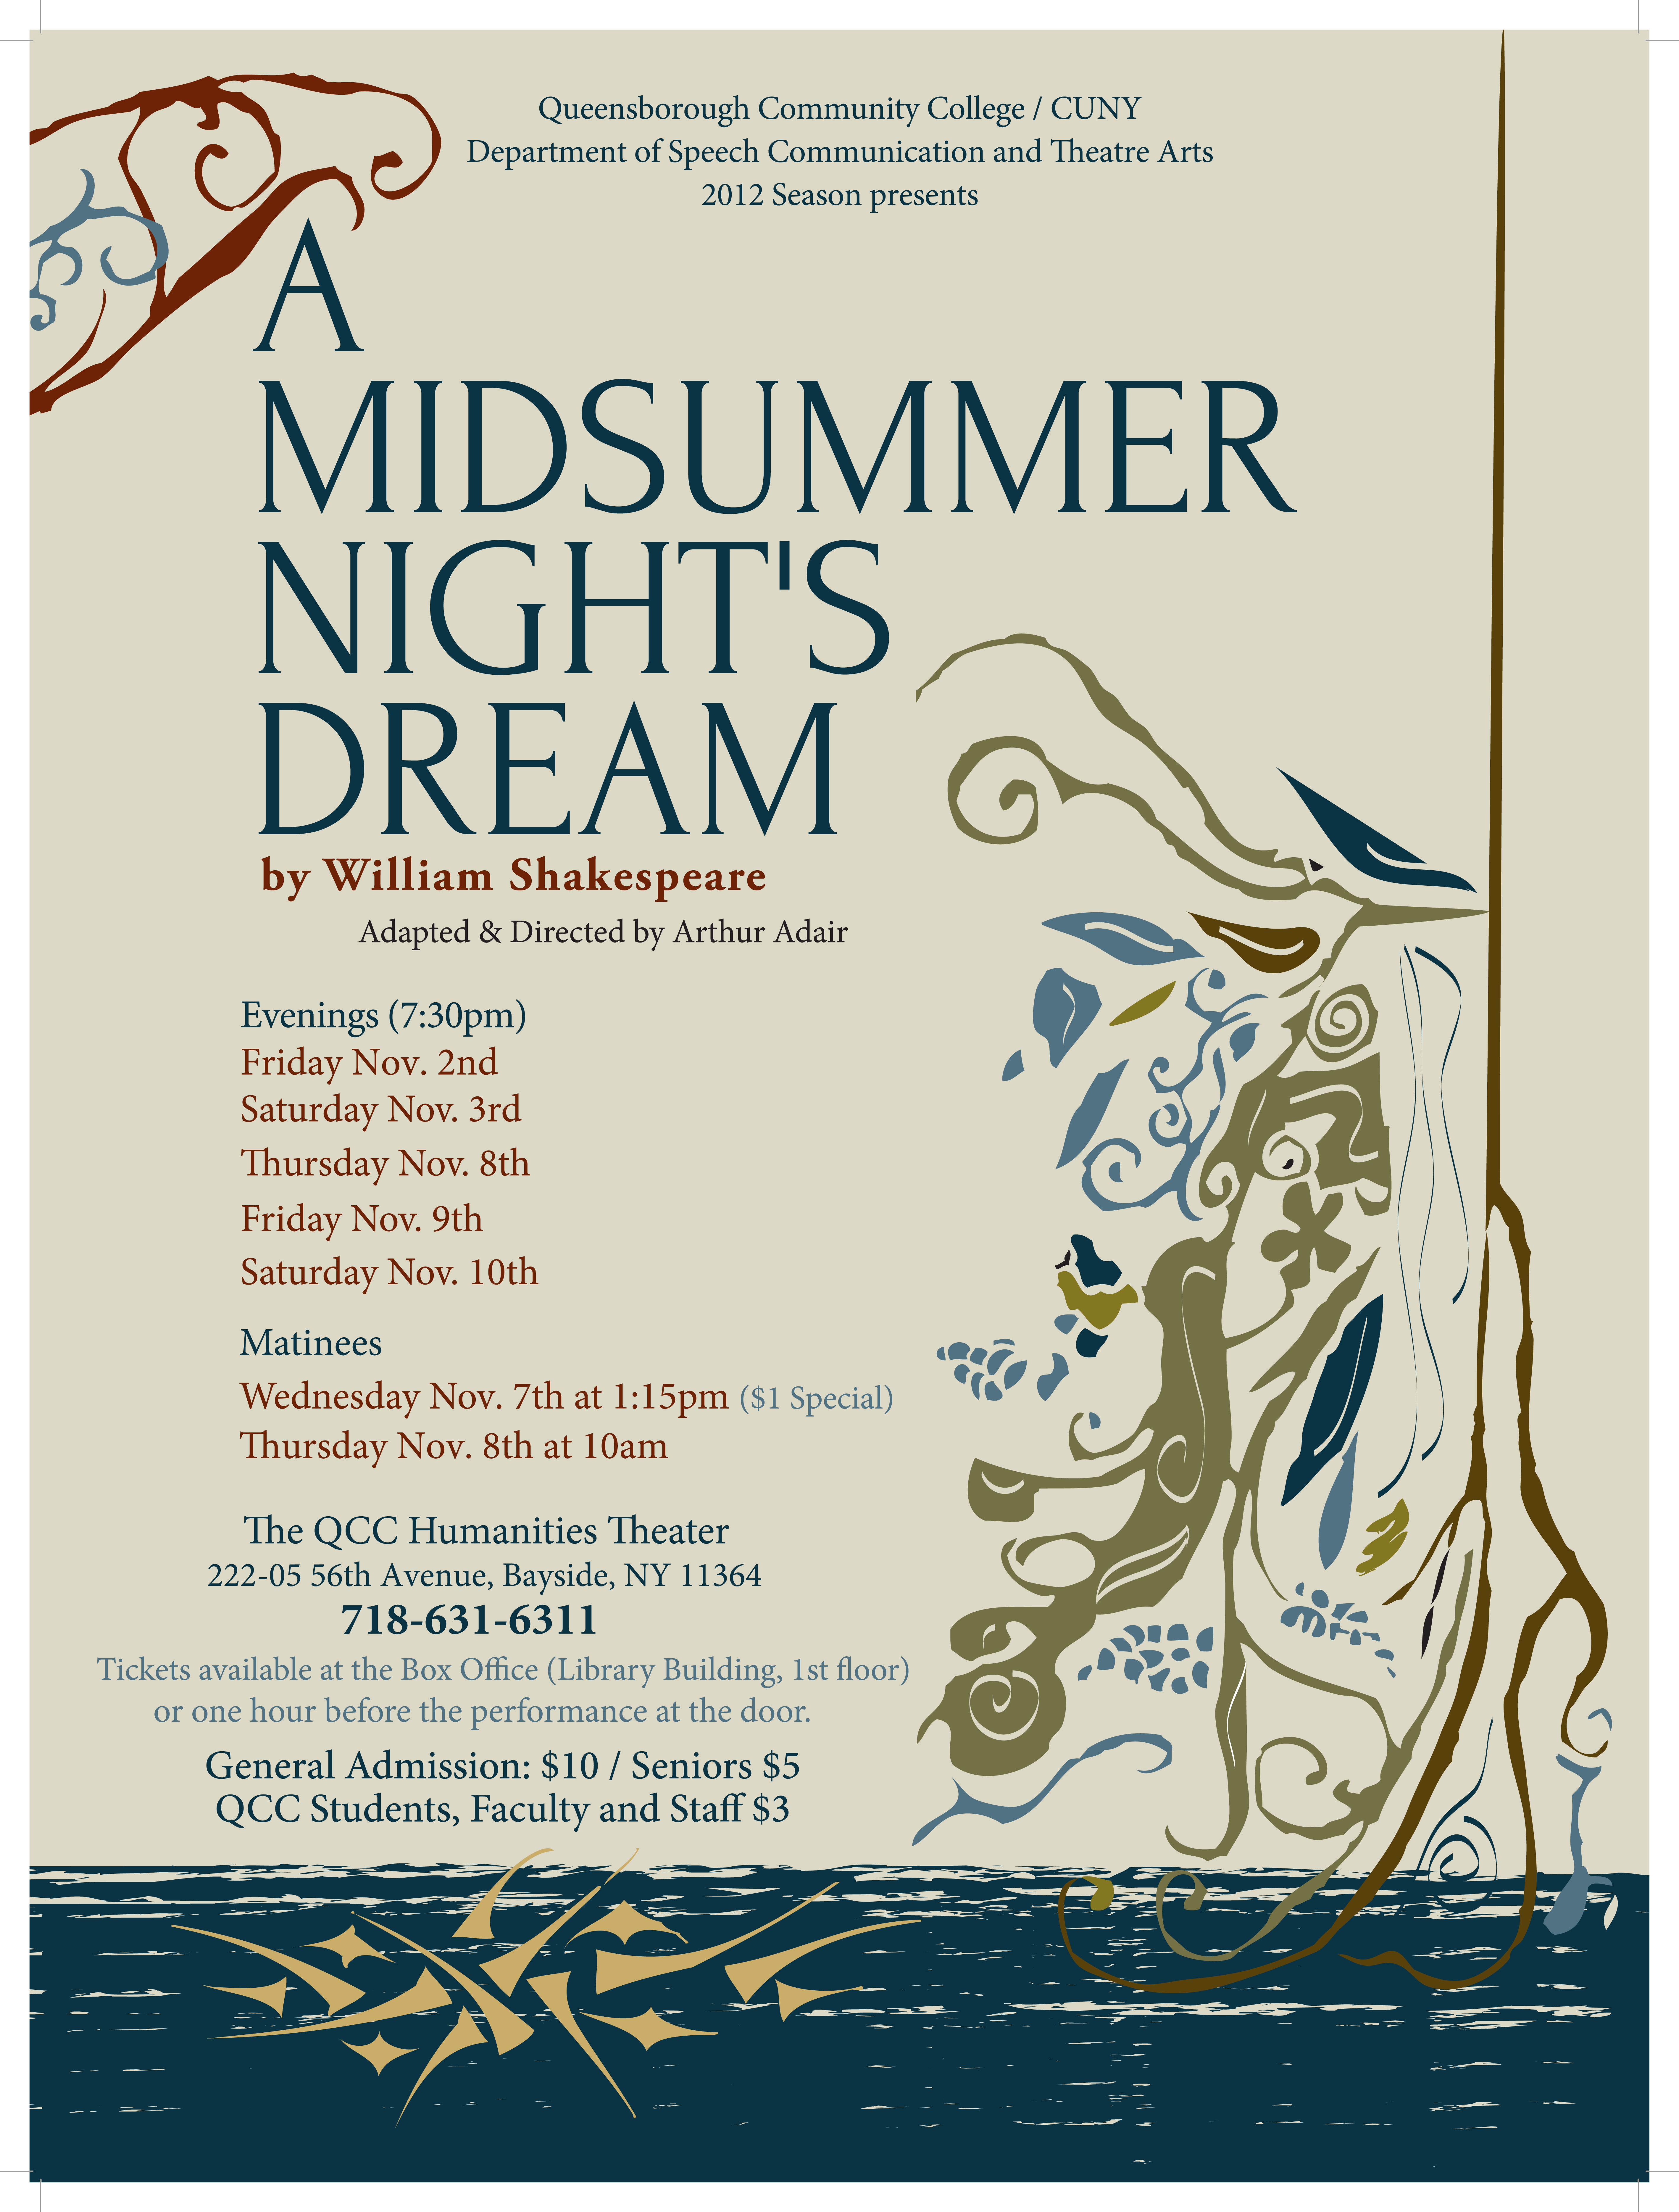 This is a poster for the past fall 2012 production of ‘A Midsummer Night’s Dream’, written by William Shakespeare, and adapted and directed by Professor Adair. The poster displays a river and vines reaching up from the water to the sky.